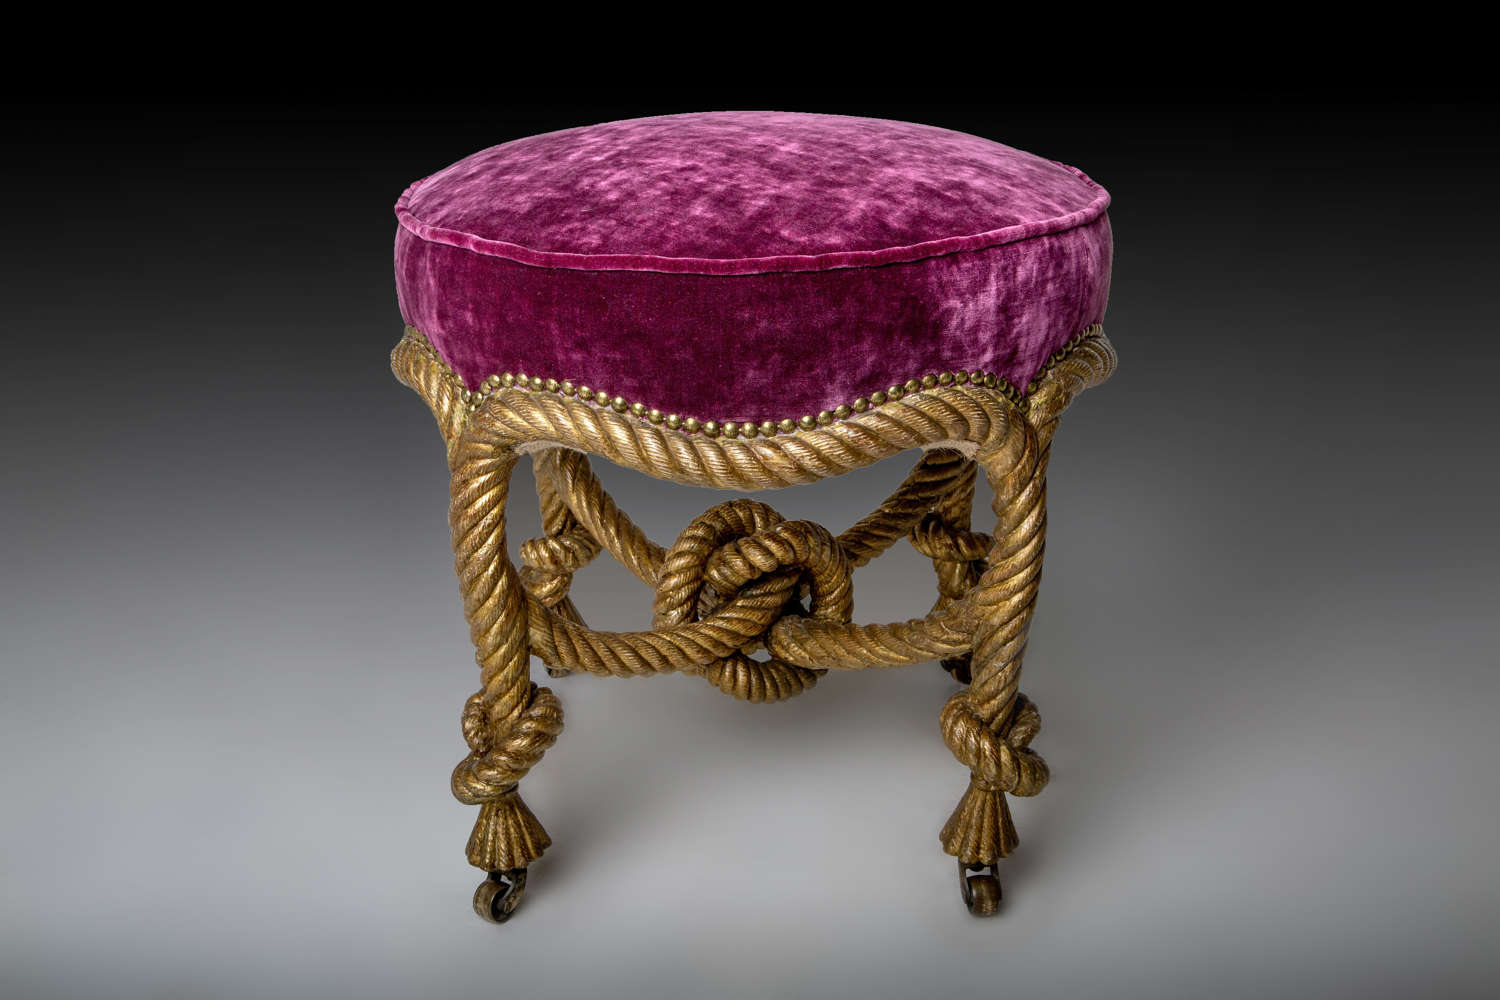 A fine giltwood rope stool